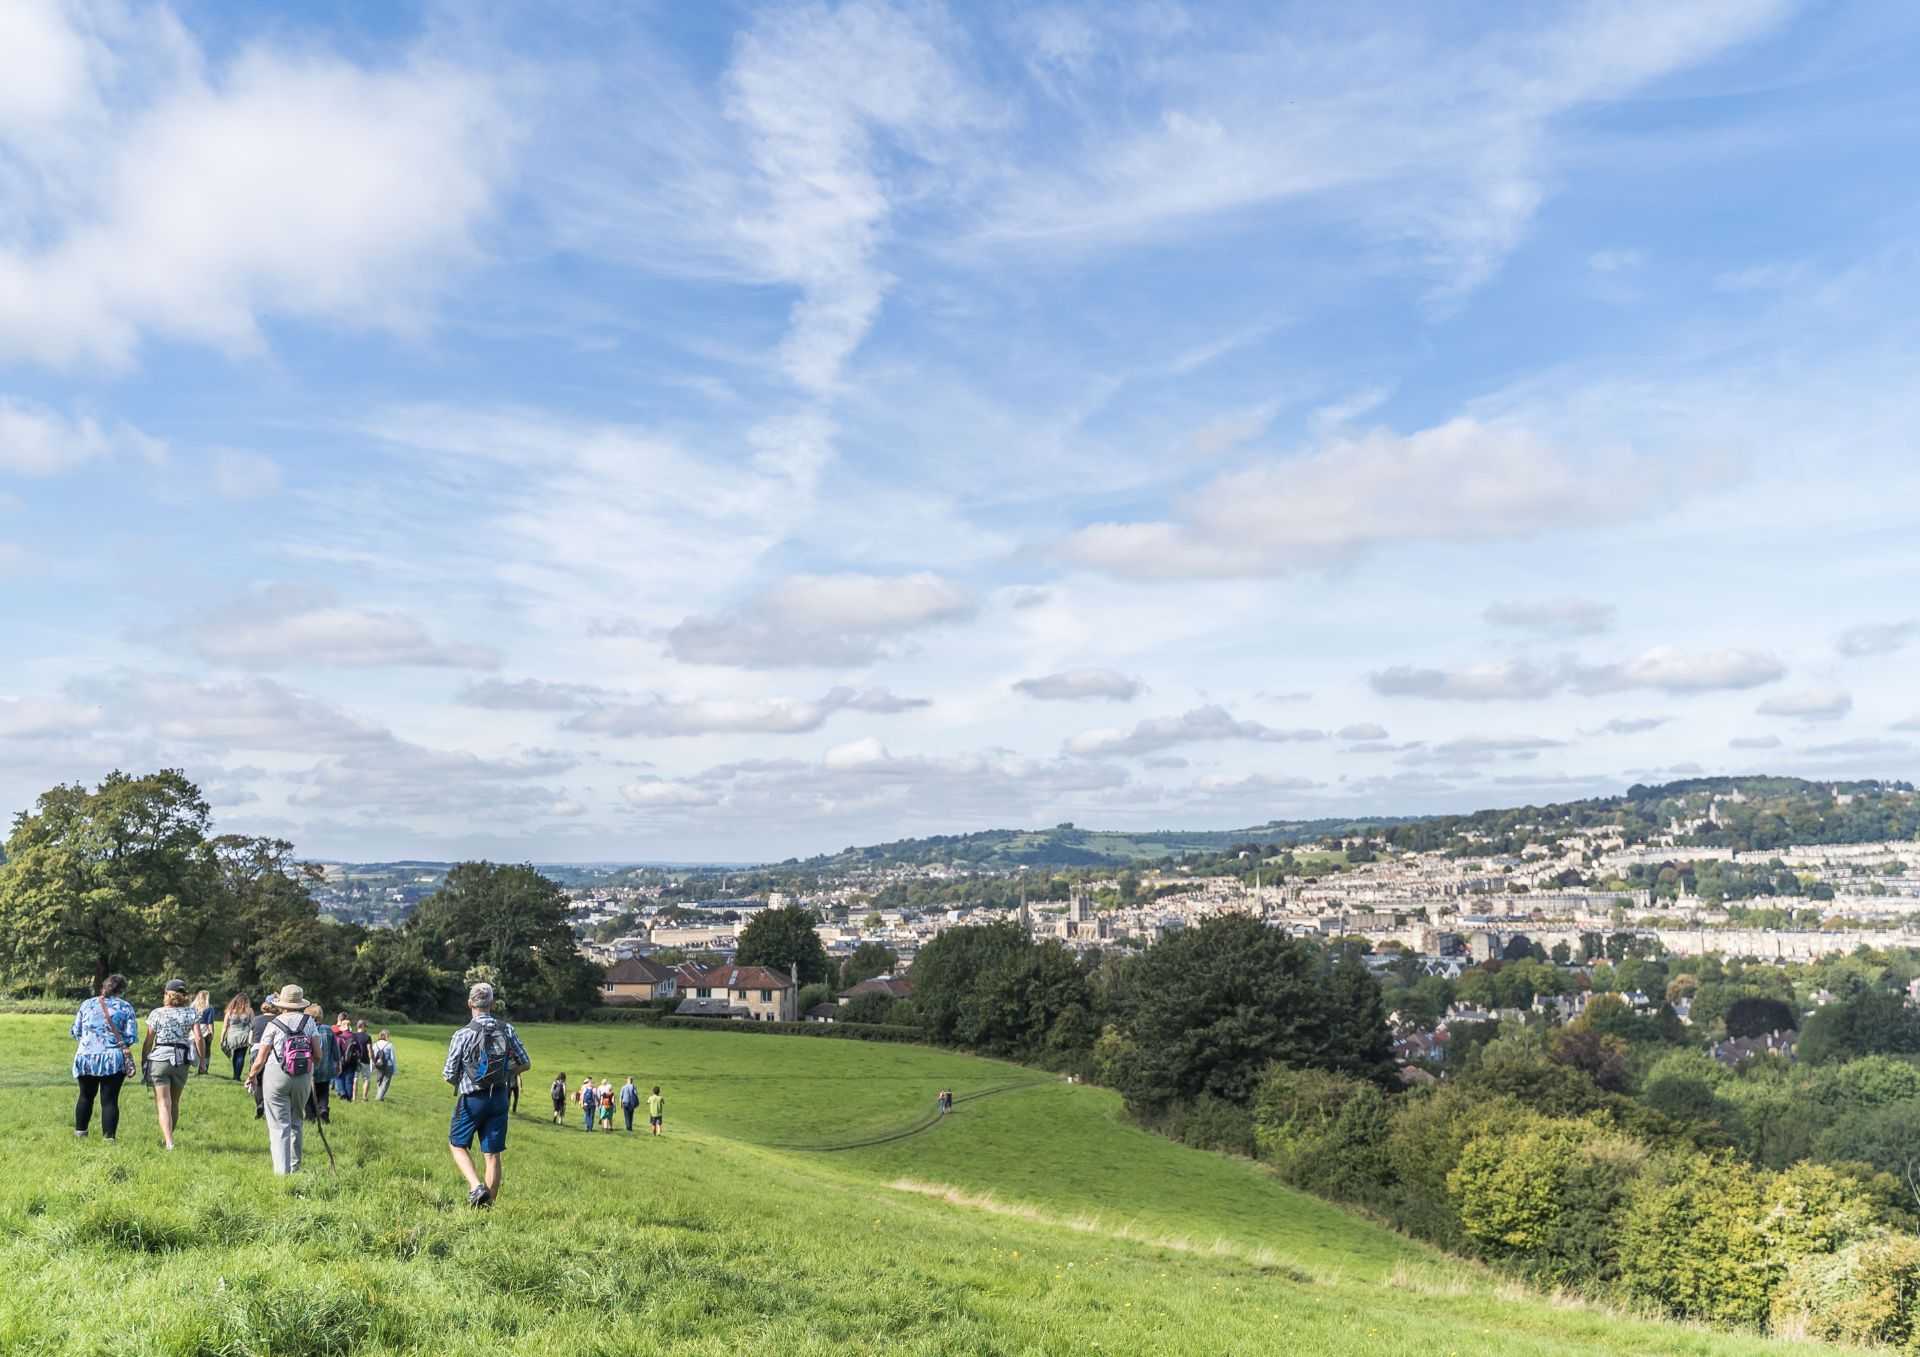 A photo of people walking in a field with a view of the Bath skyline